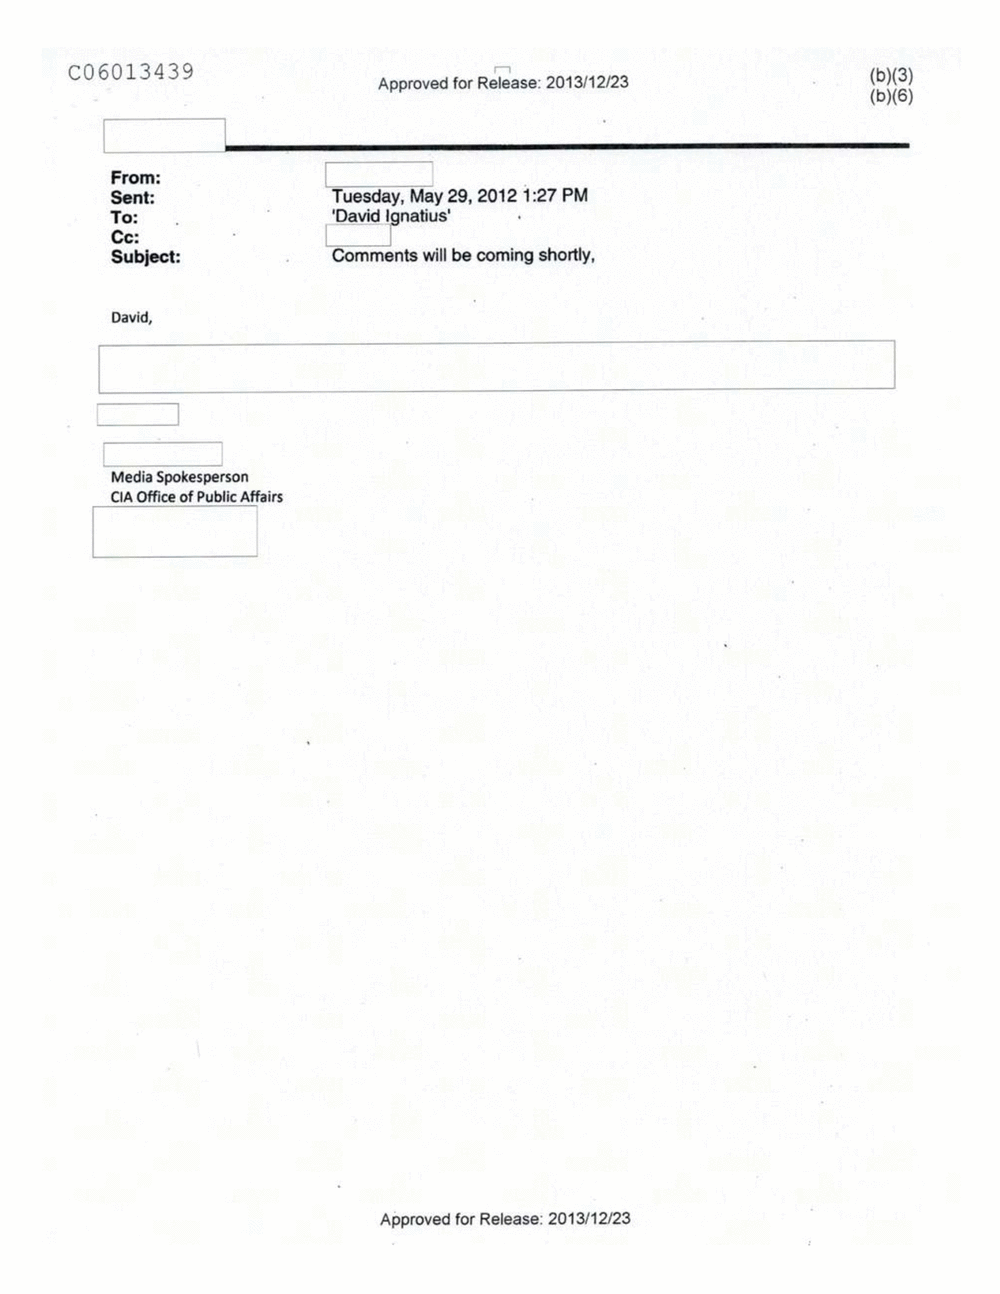 Page 303 from Email Correspondence Between Reporters and CIA Flacks